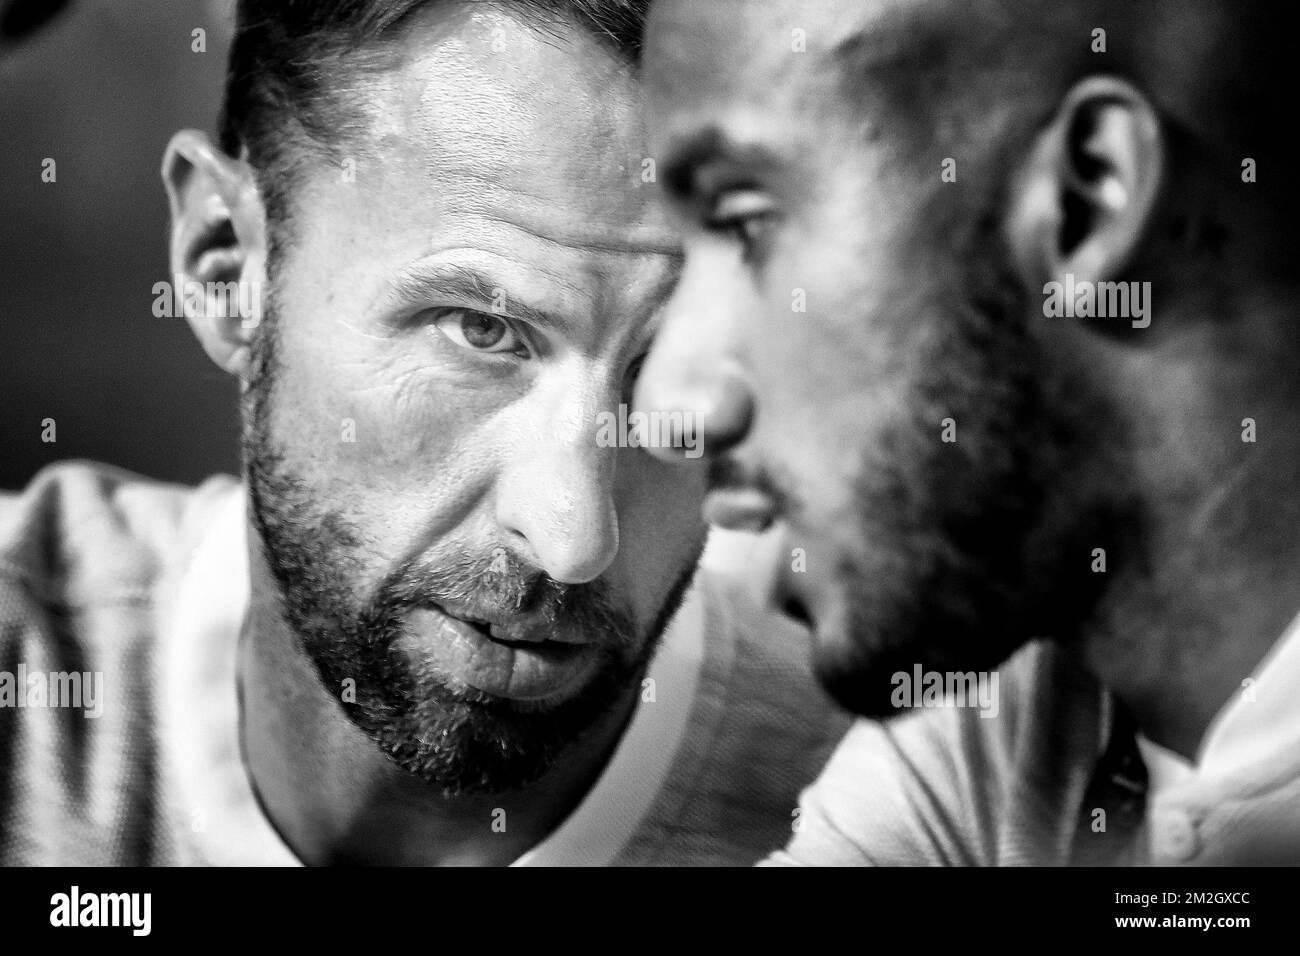 England's Head Coach Gareth Southgate and England's Fabian Delph pictured during a press conference of the English soccer team, in Saint-Petersburg, Russia, Friday 13 July 2018. On Saturday the Belgian national soccer team the Red Devils will meet England in the Third place play-off of the FIFA World Cup 2018. BELGA PHOTO BRUNO FAHY Stock Photo